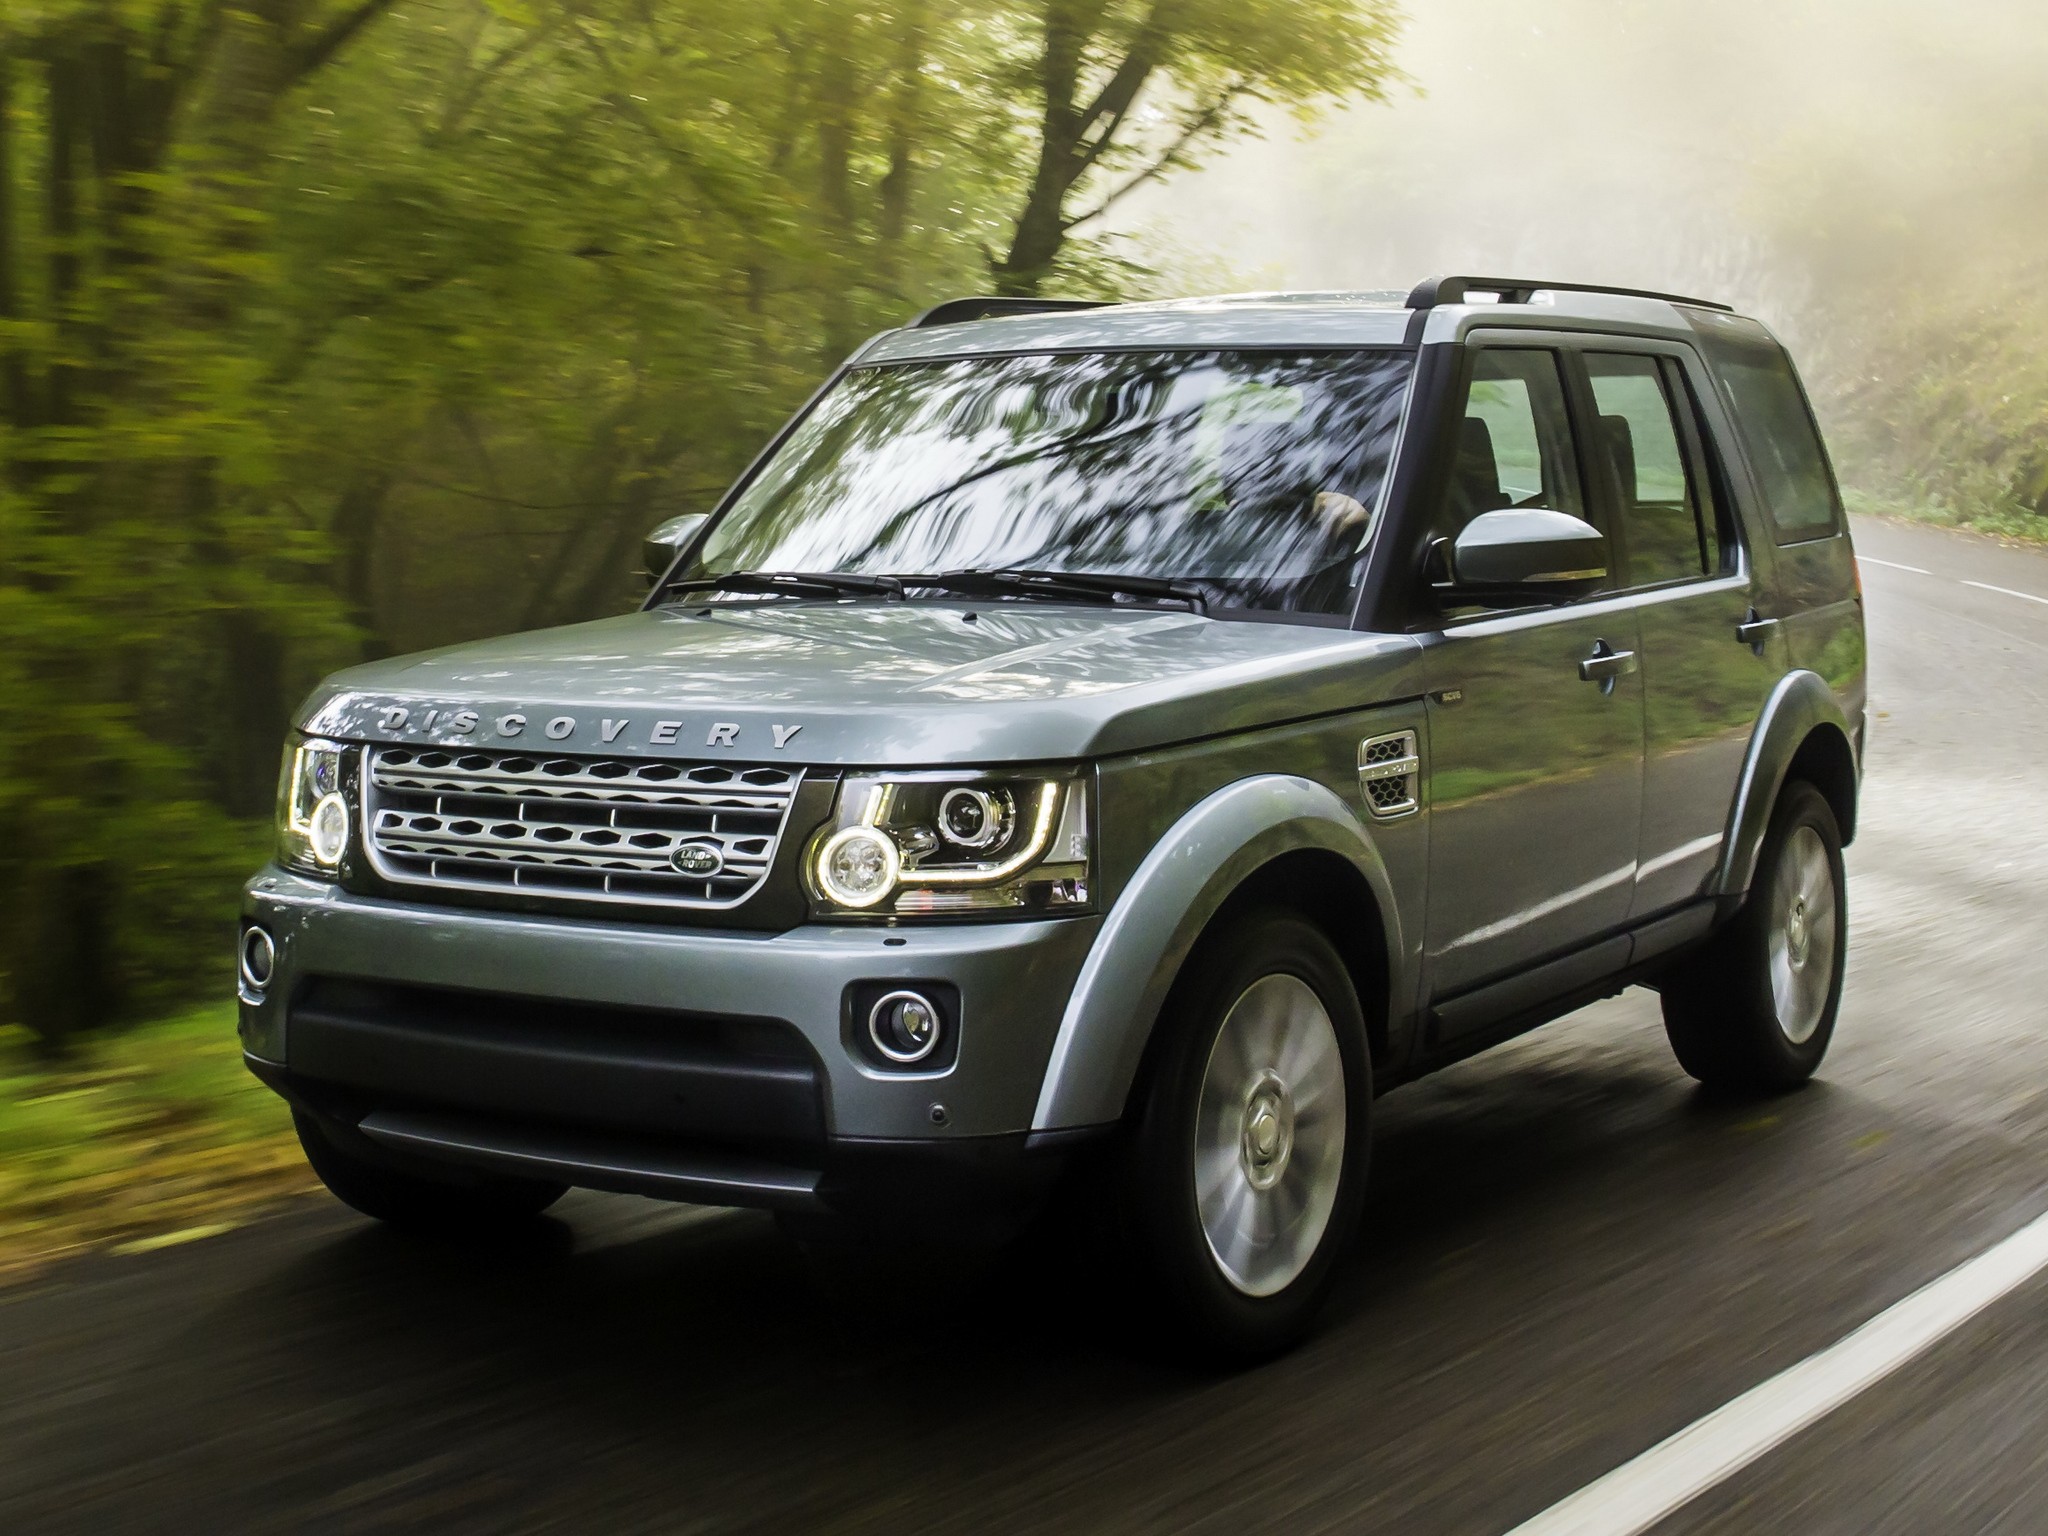 Used Land Rover Discovery 4 buying guide: 2009-2016 (Mk4 